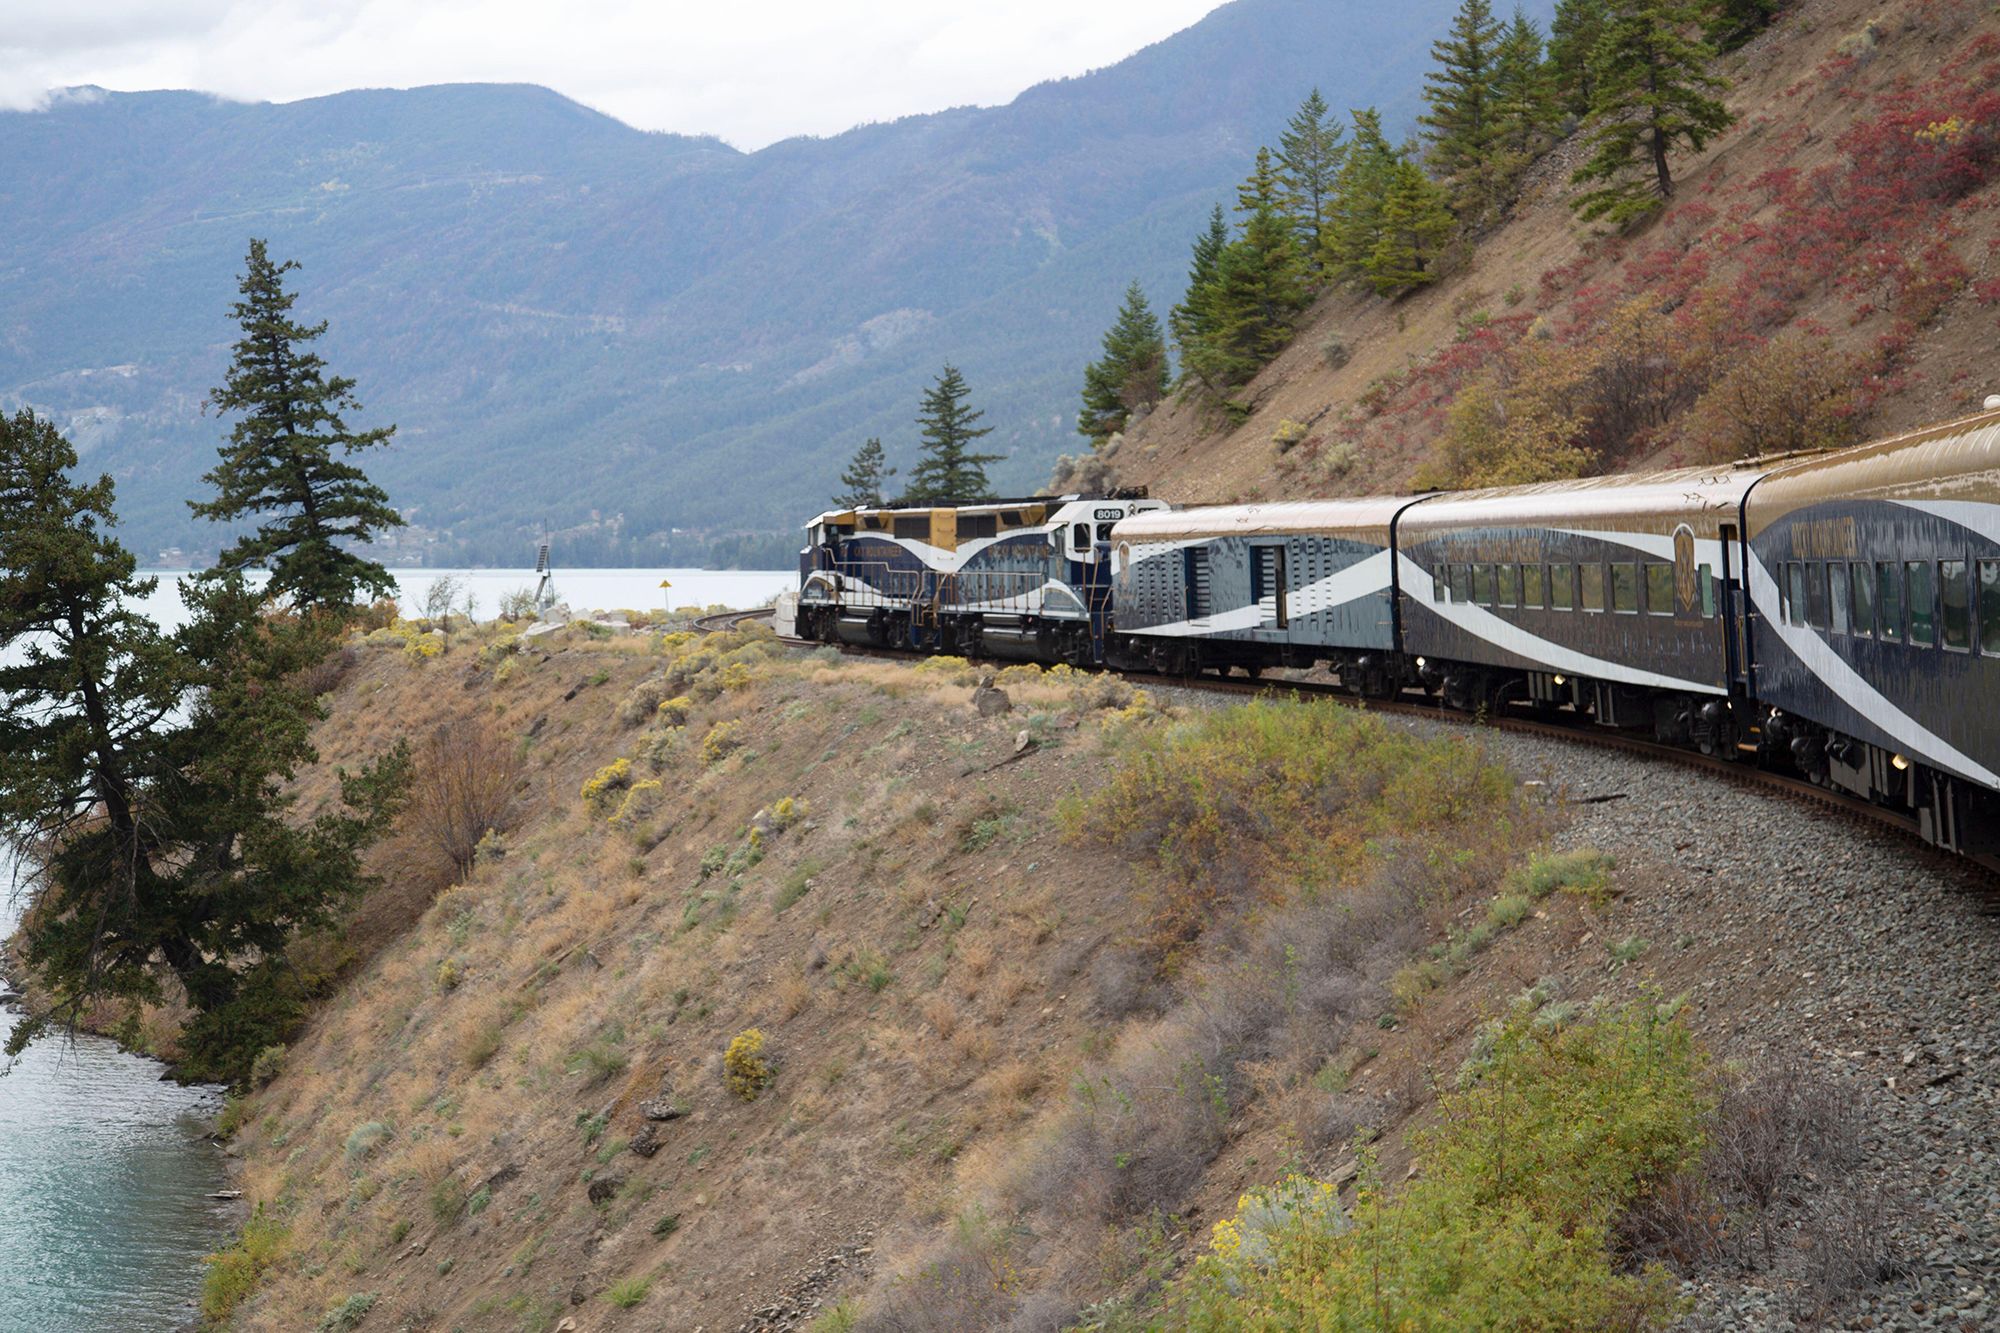 Railbookers' 80-day trip around the world will include a ride on Canada's Rocky Mountaineer train.